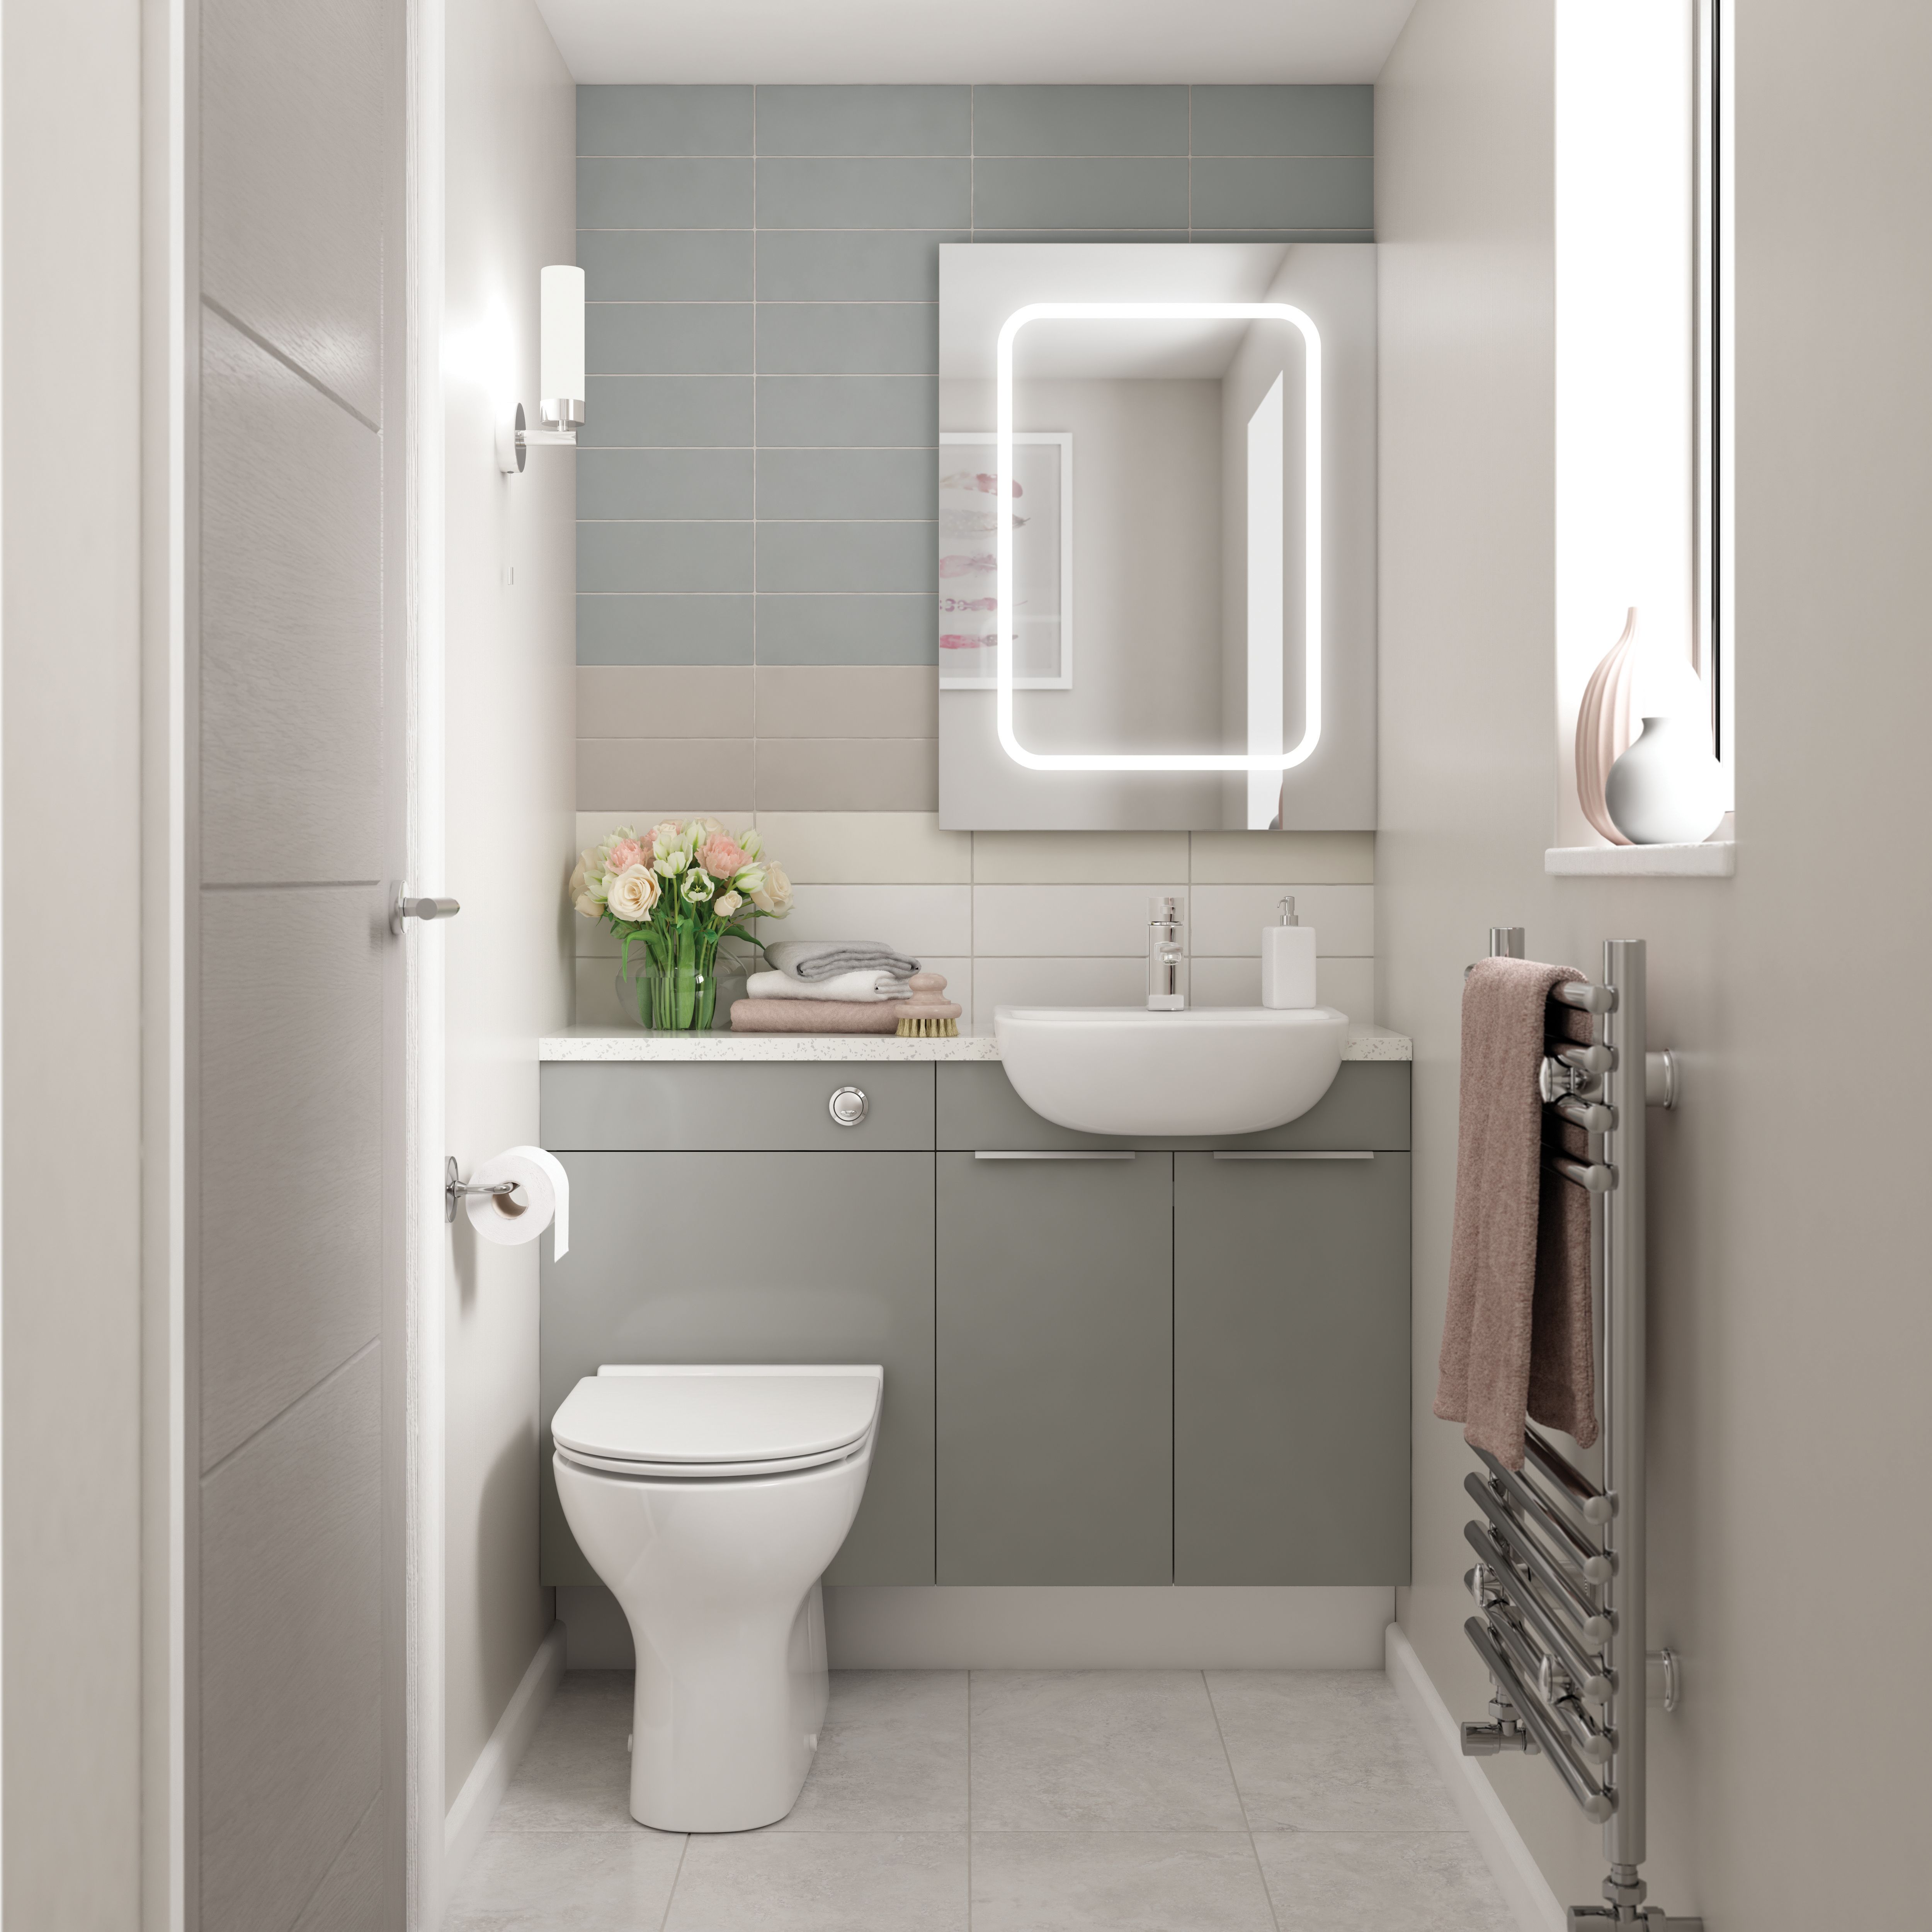 Image of Wickes Vienna Grey Compact WC Unit - 600 x 735mm